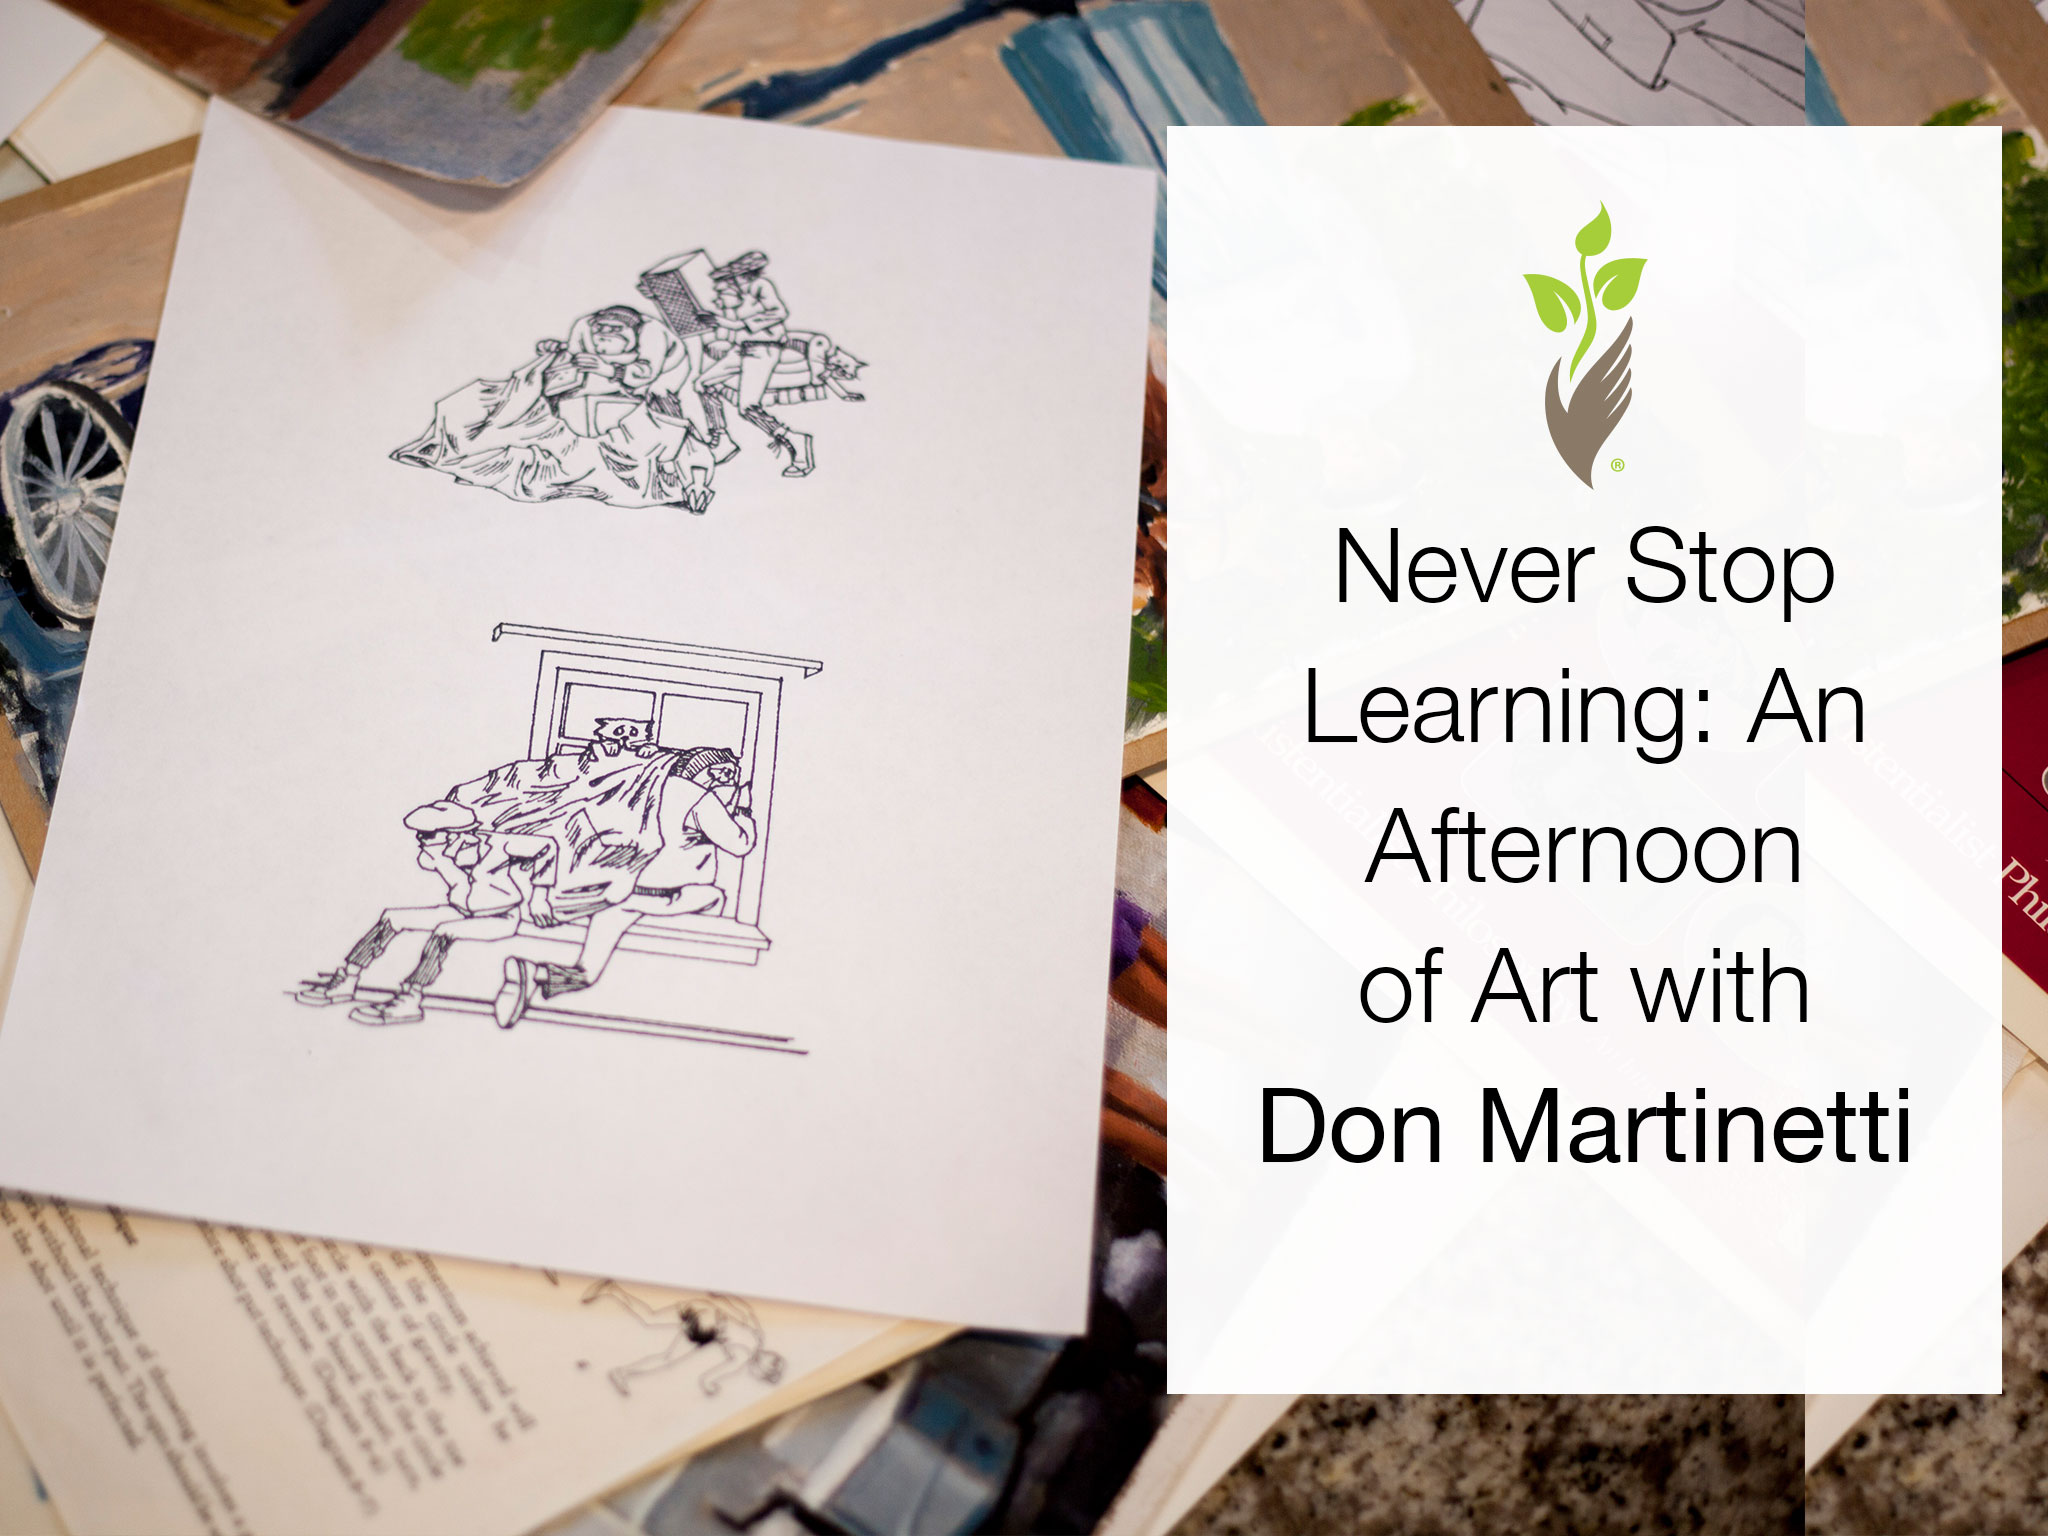 Never Stop Learning: An Afternoon of Art with Don Martinetti